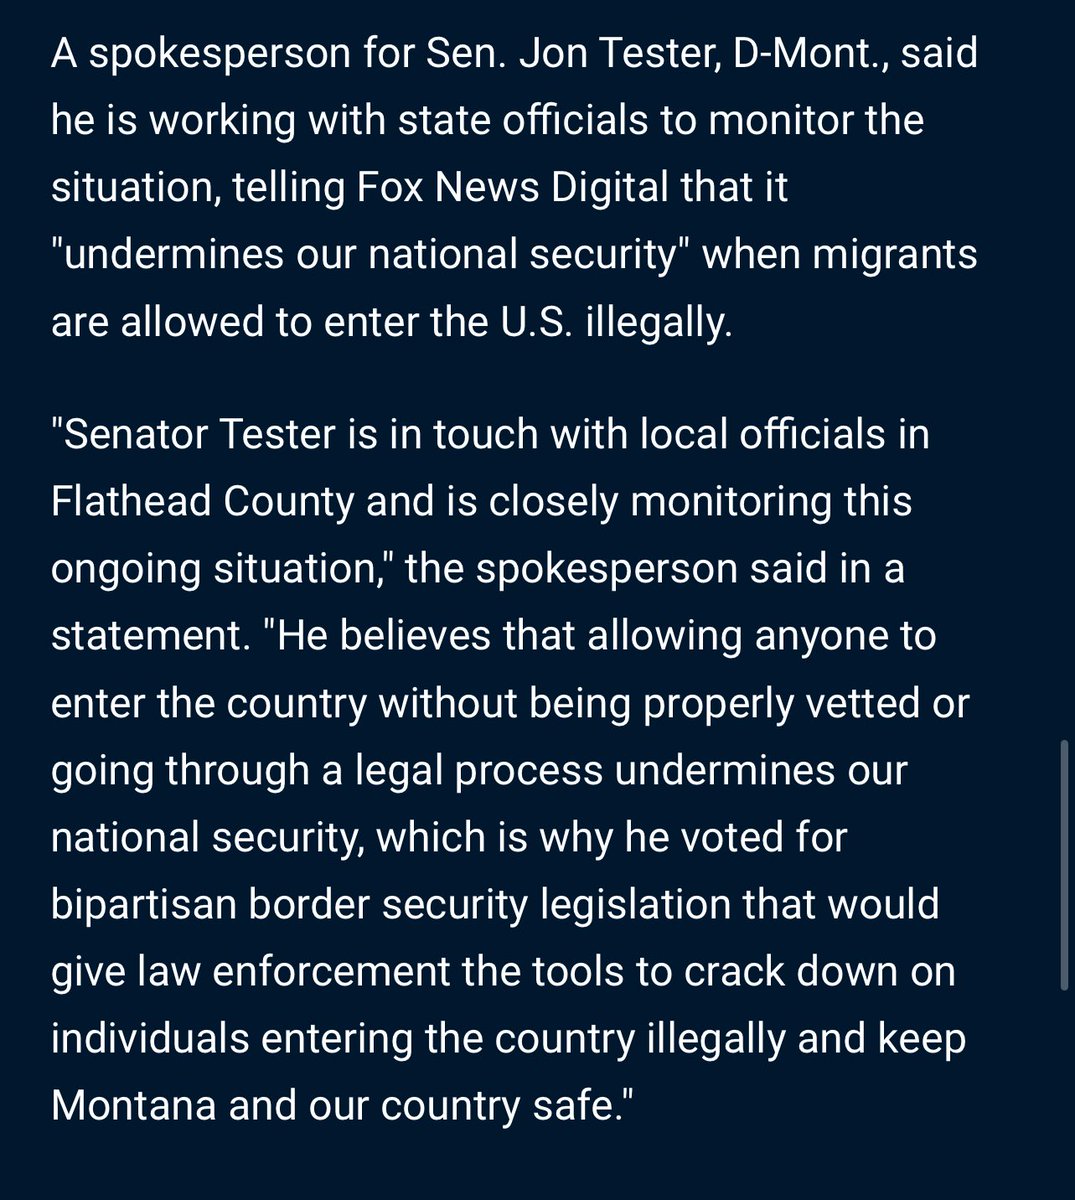 .@SenatorTester is showing outrage over the illegal Venezuelans flown into the flathead valley without anyone's knowledge. 

.@jontester is also responsible for providing the cash for those illegal's airfare. 

#Montana #retiretester #mtpol #mtnews #MTSEN

Vote @SheehyforMT